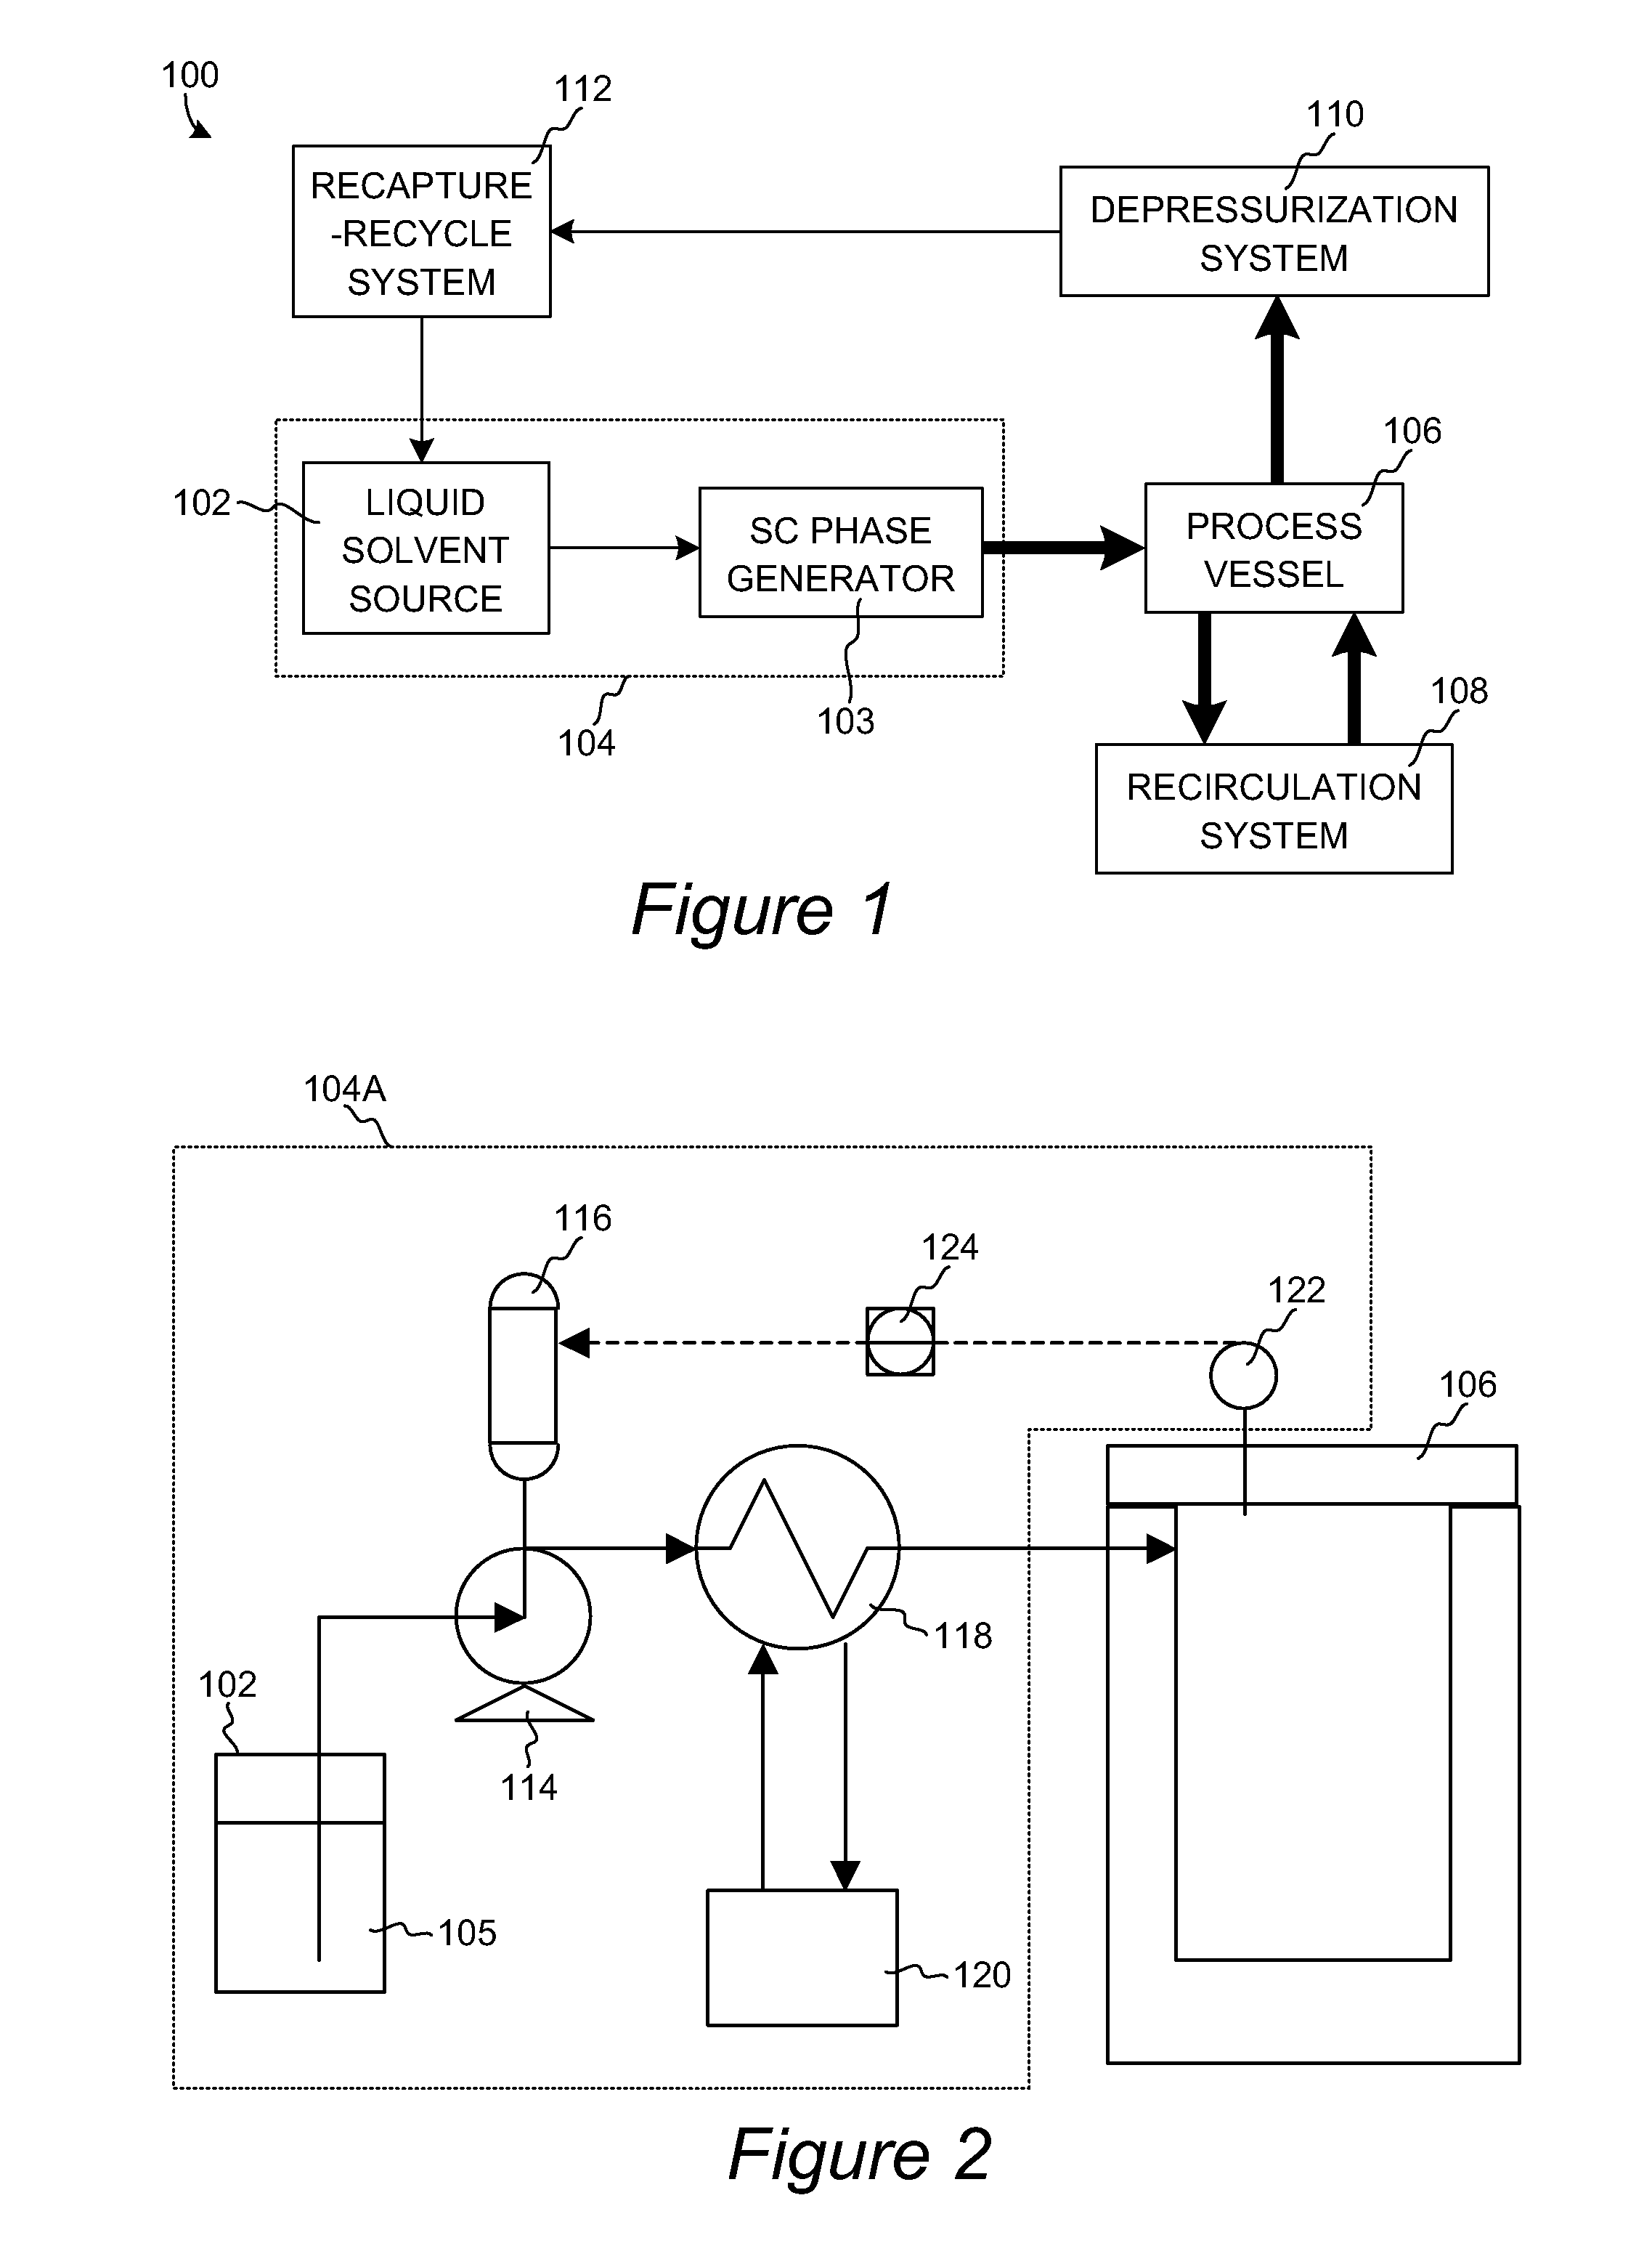 Apparatus and methods for increasing the rate of solute concentration evolution in a supercritical process chamber